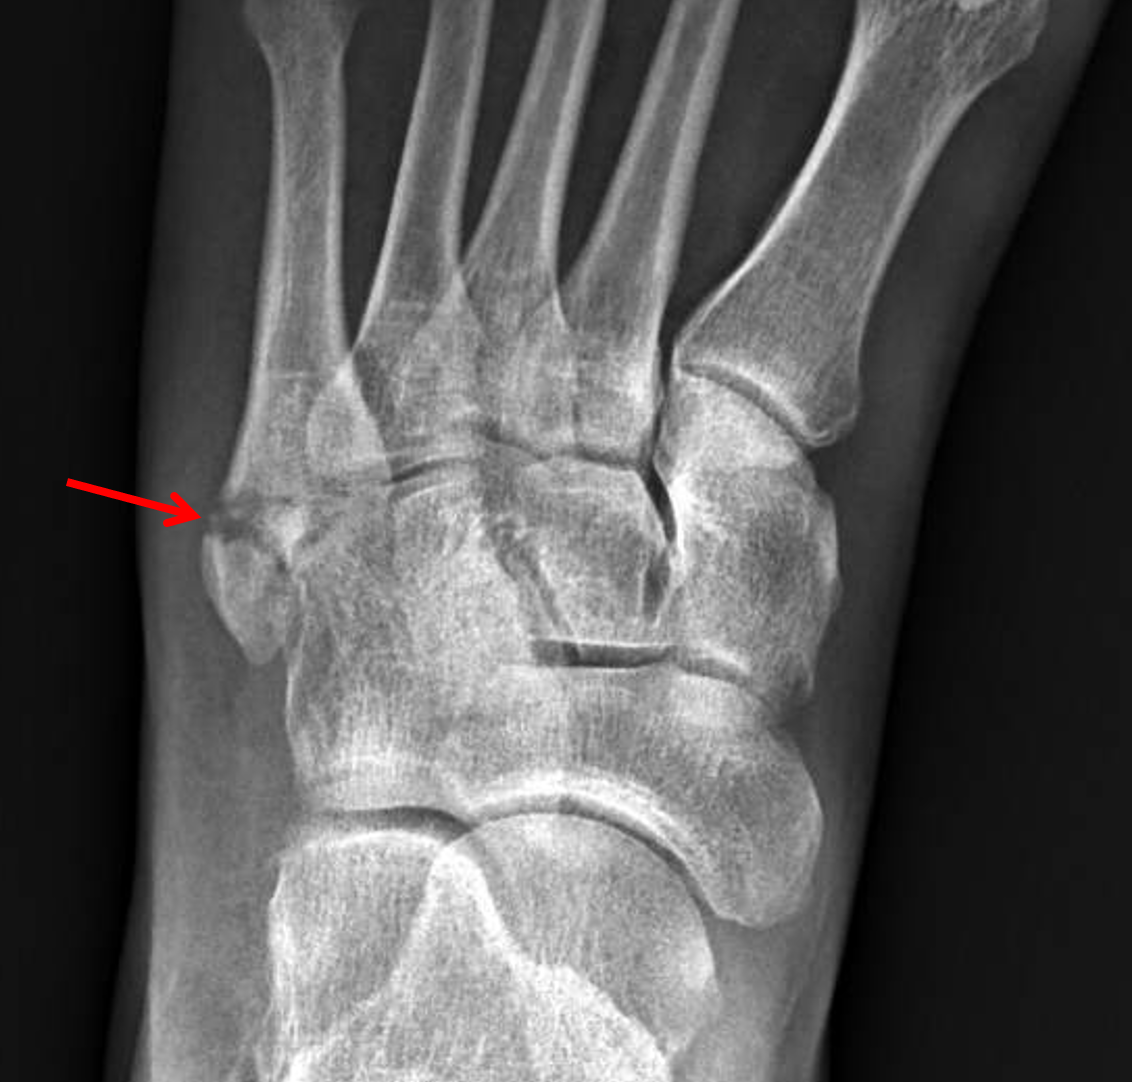 5th Metatarsal Base Fracture